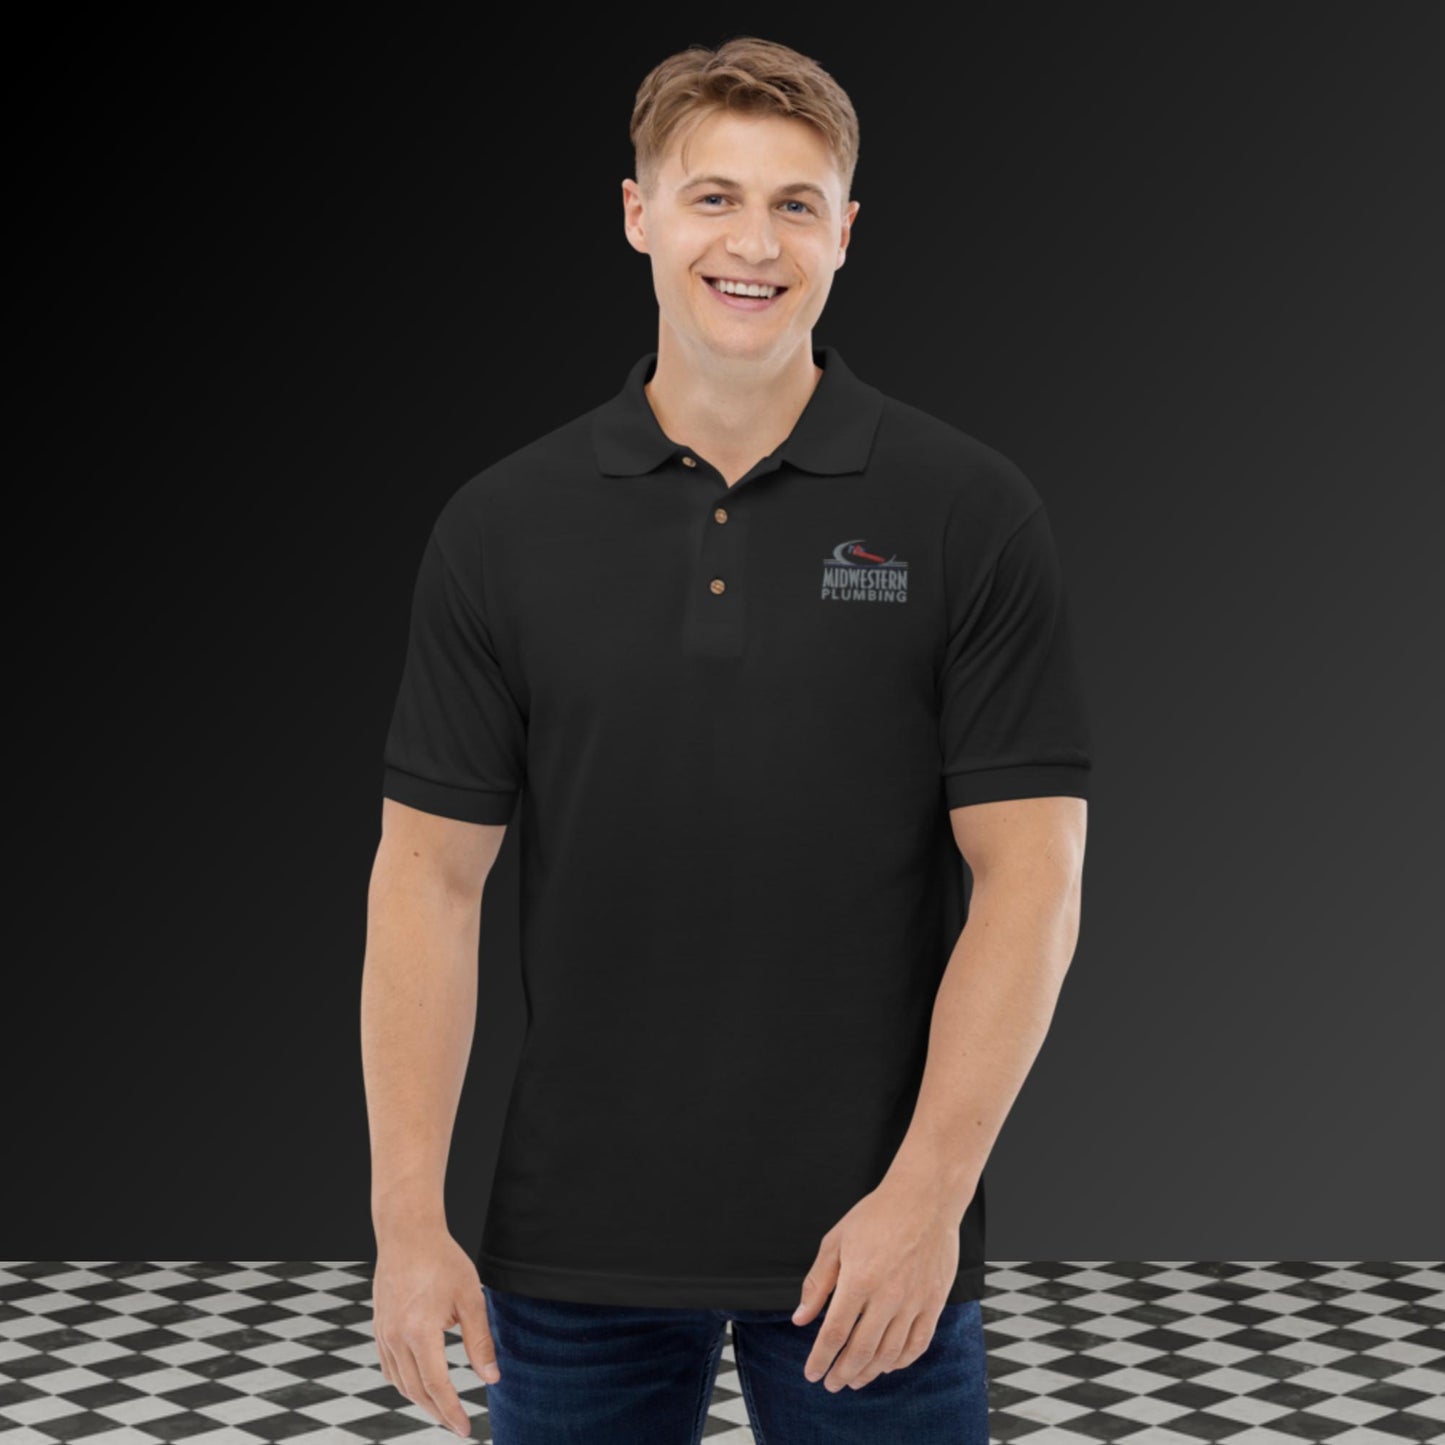 Midwestern Plumbing Embroidered Polo Shirt